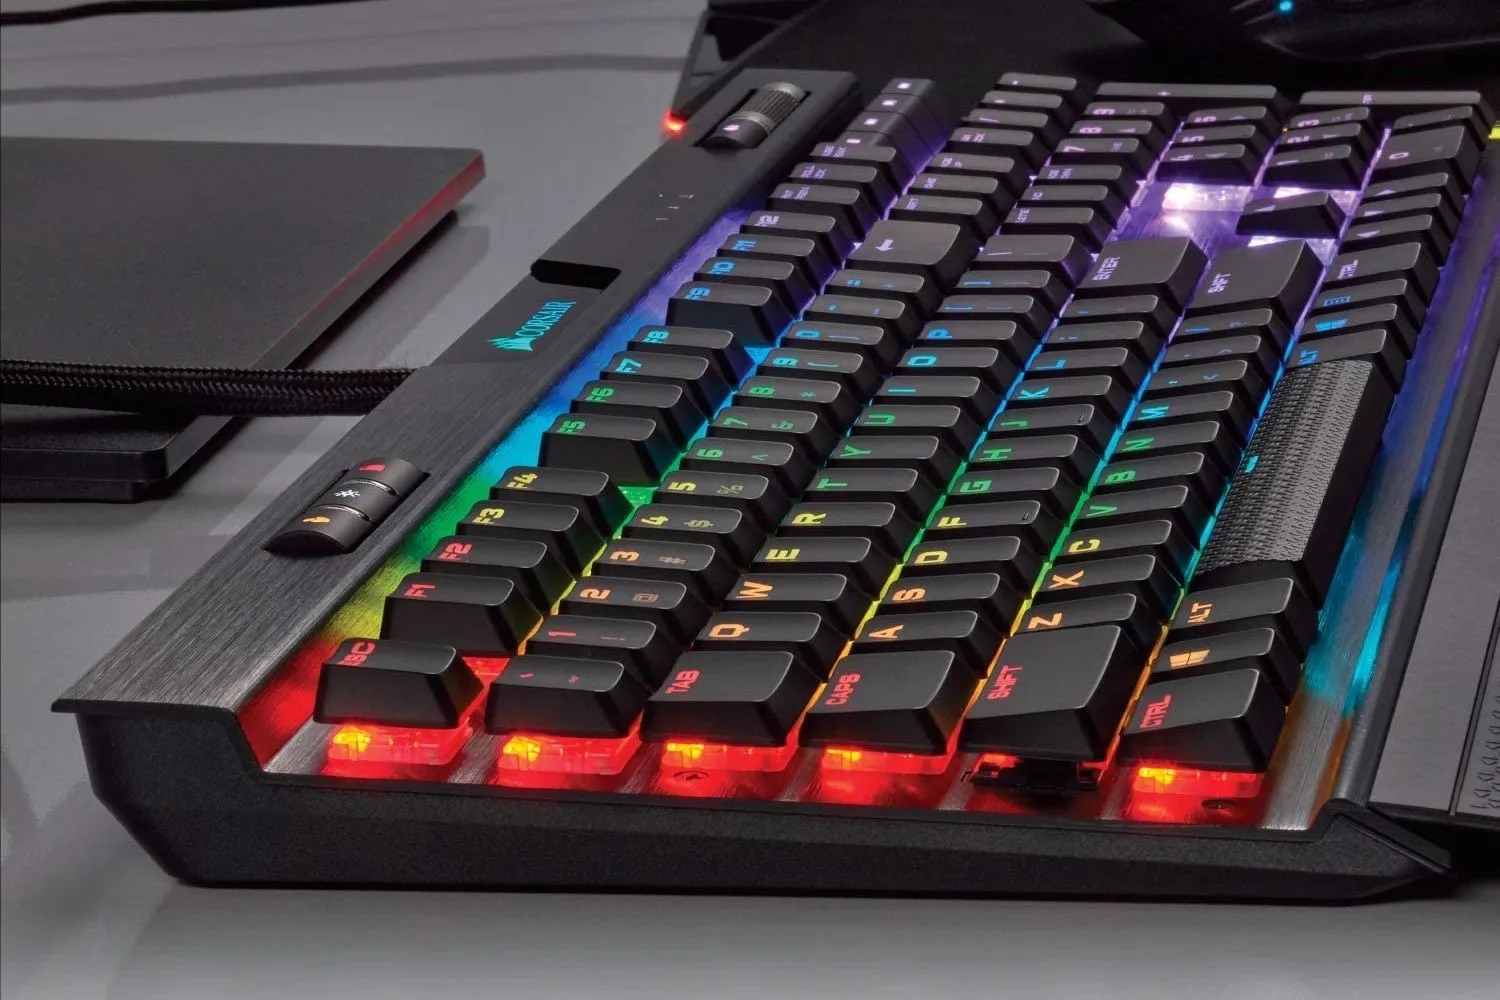 How To Stop The Light From Flashing On An LED Backlit Gaming Keyboard